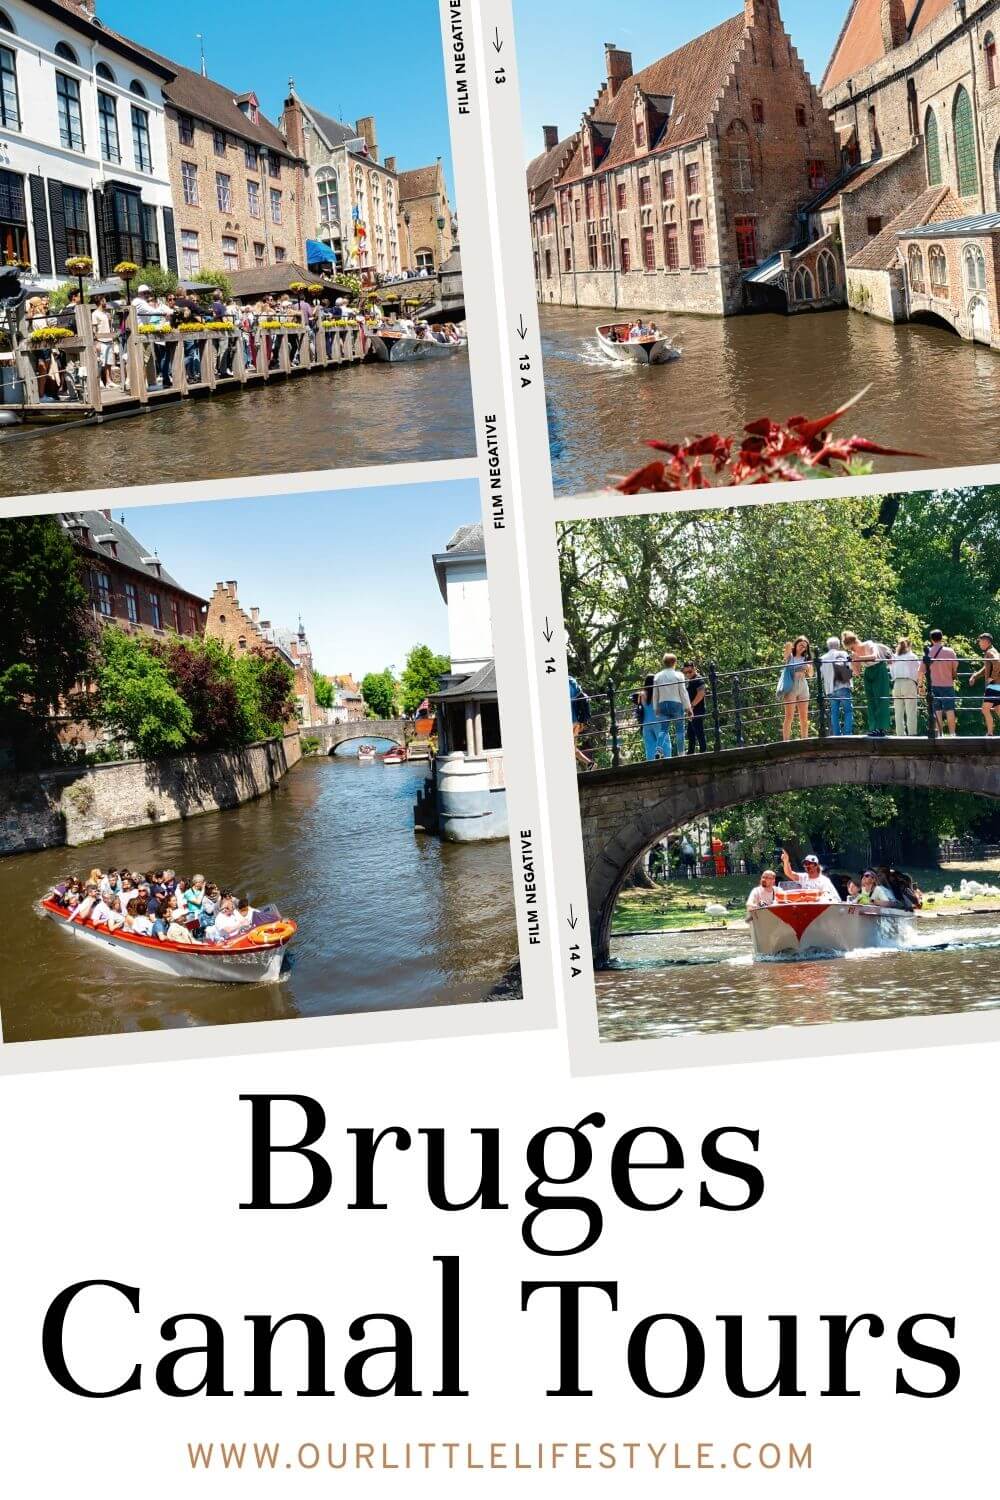 Bruges canal tours Tickets